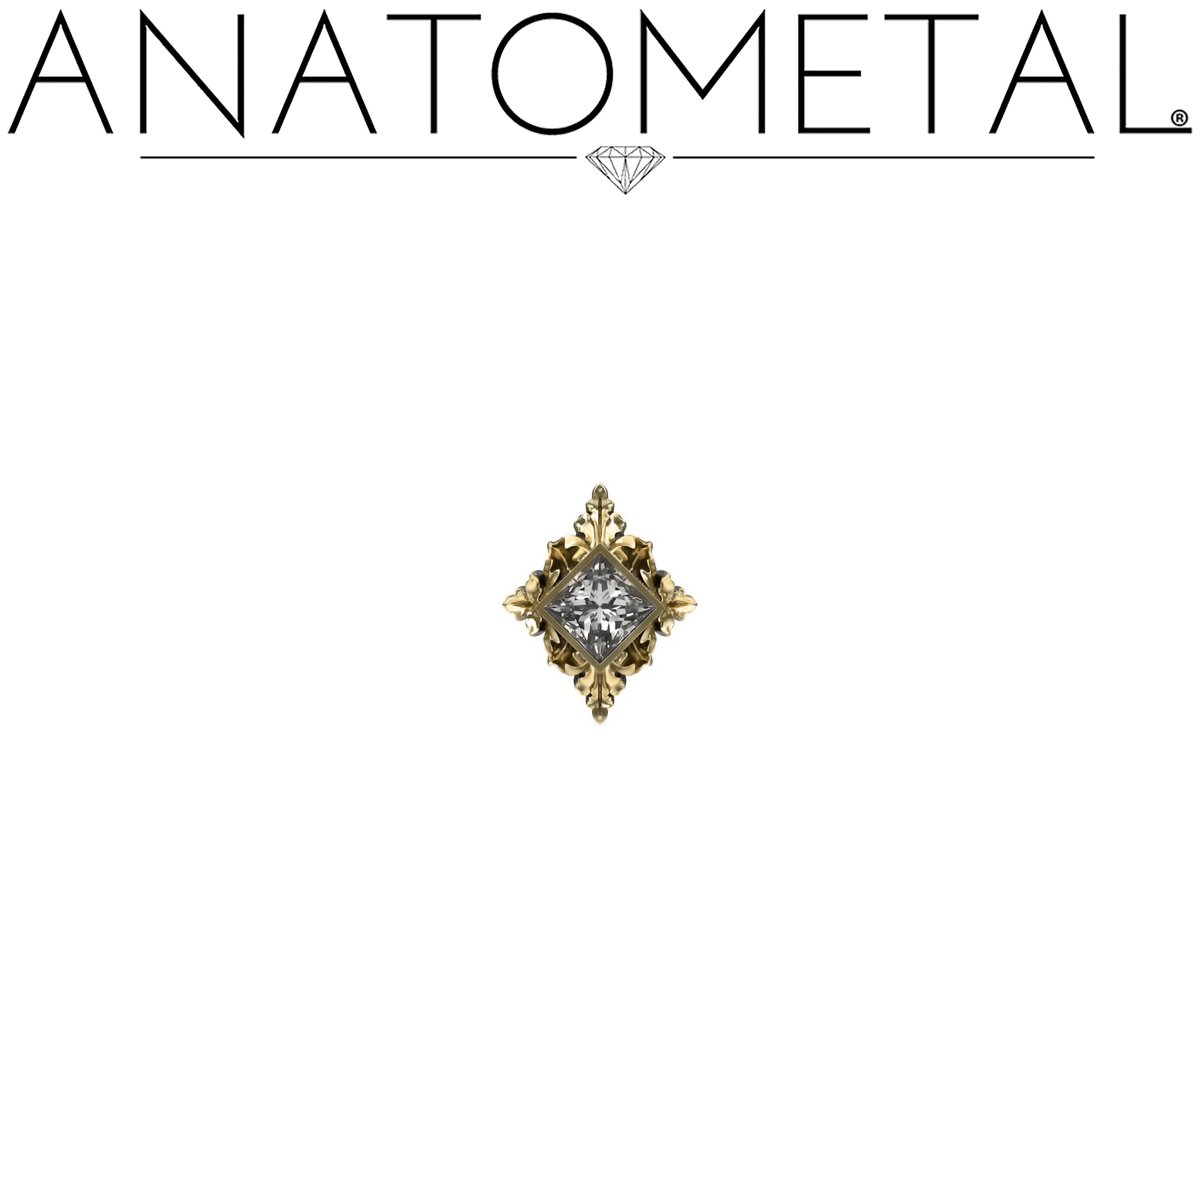 Adorn yourself with the luxury of our Manteca Princess Gem End, exquisitely framed by delicate leafy foliage in 18k yellow, white, and rose gold.  ✨

#Anatometal #Anatometalinc #18kgold #princessgemstone #bodyjewelry #safepiercings #firstpiercingsafe